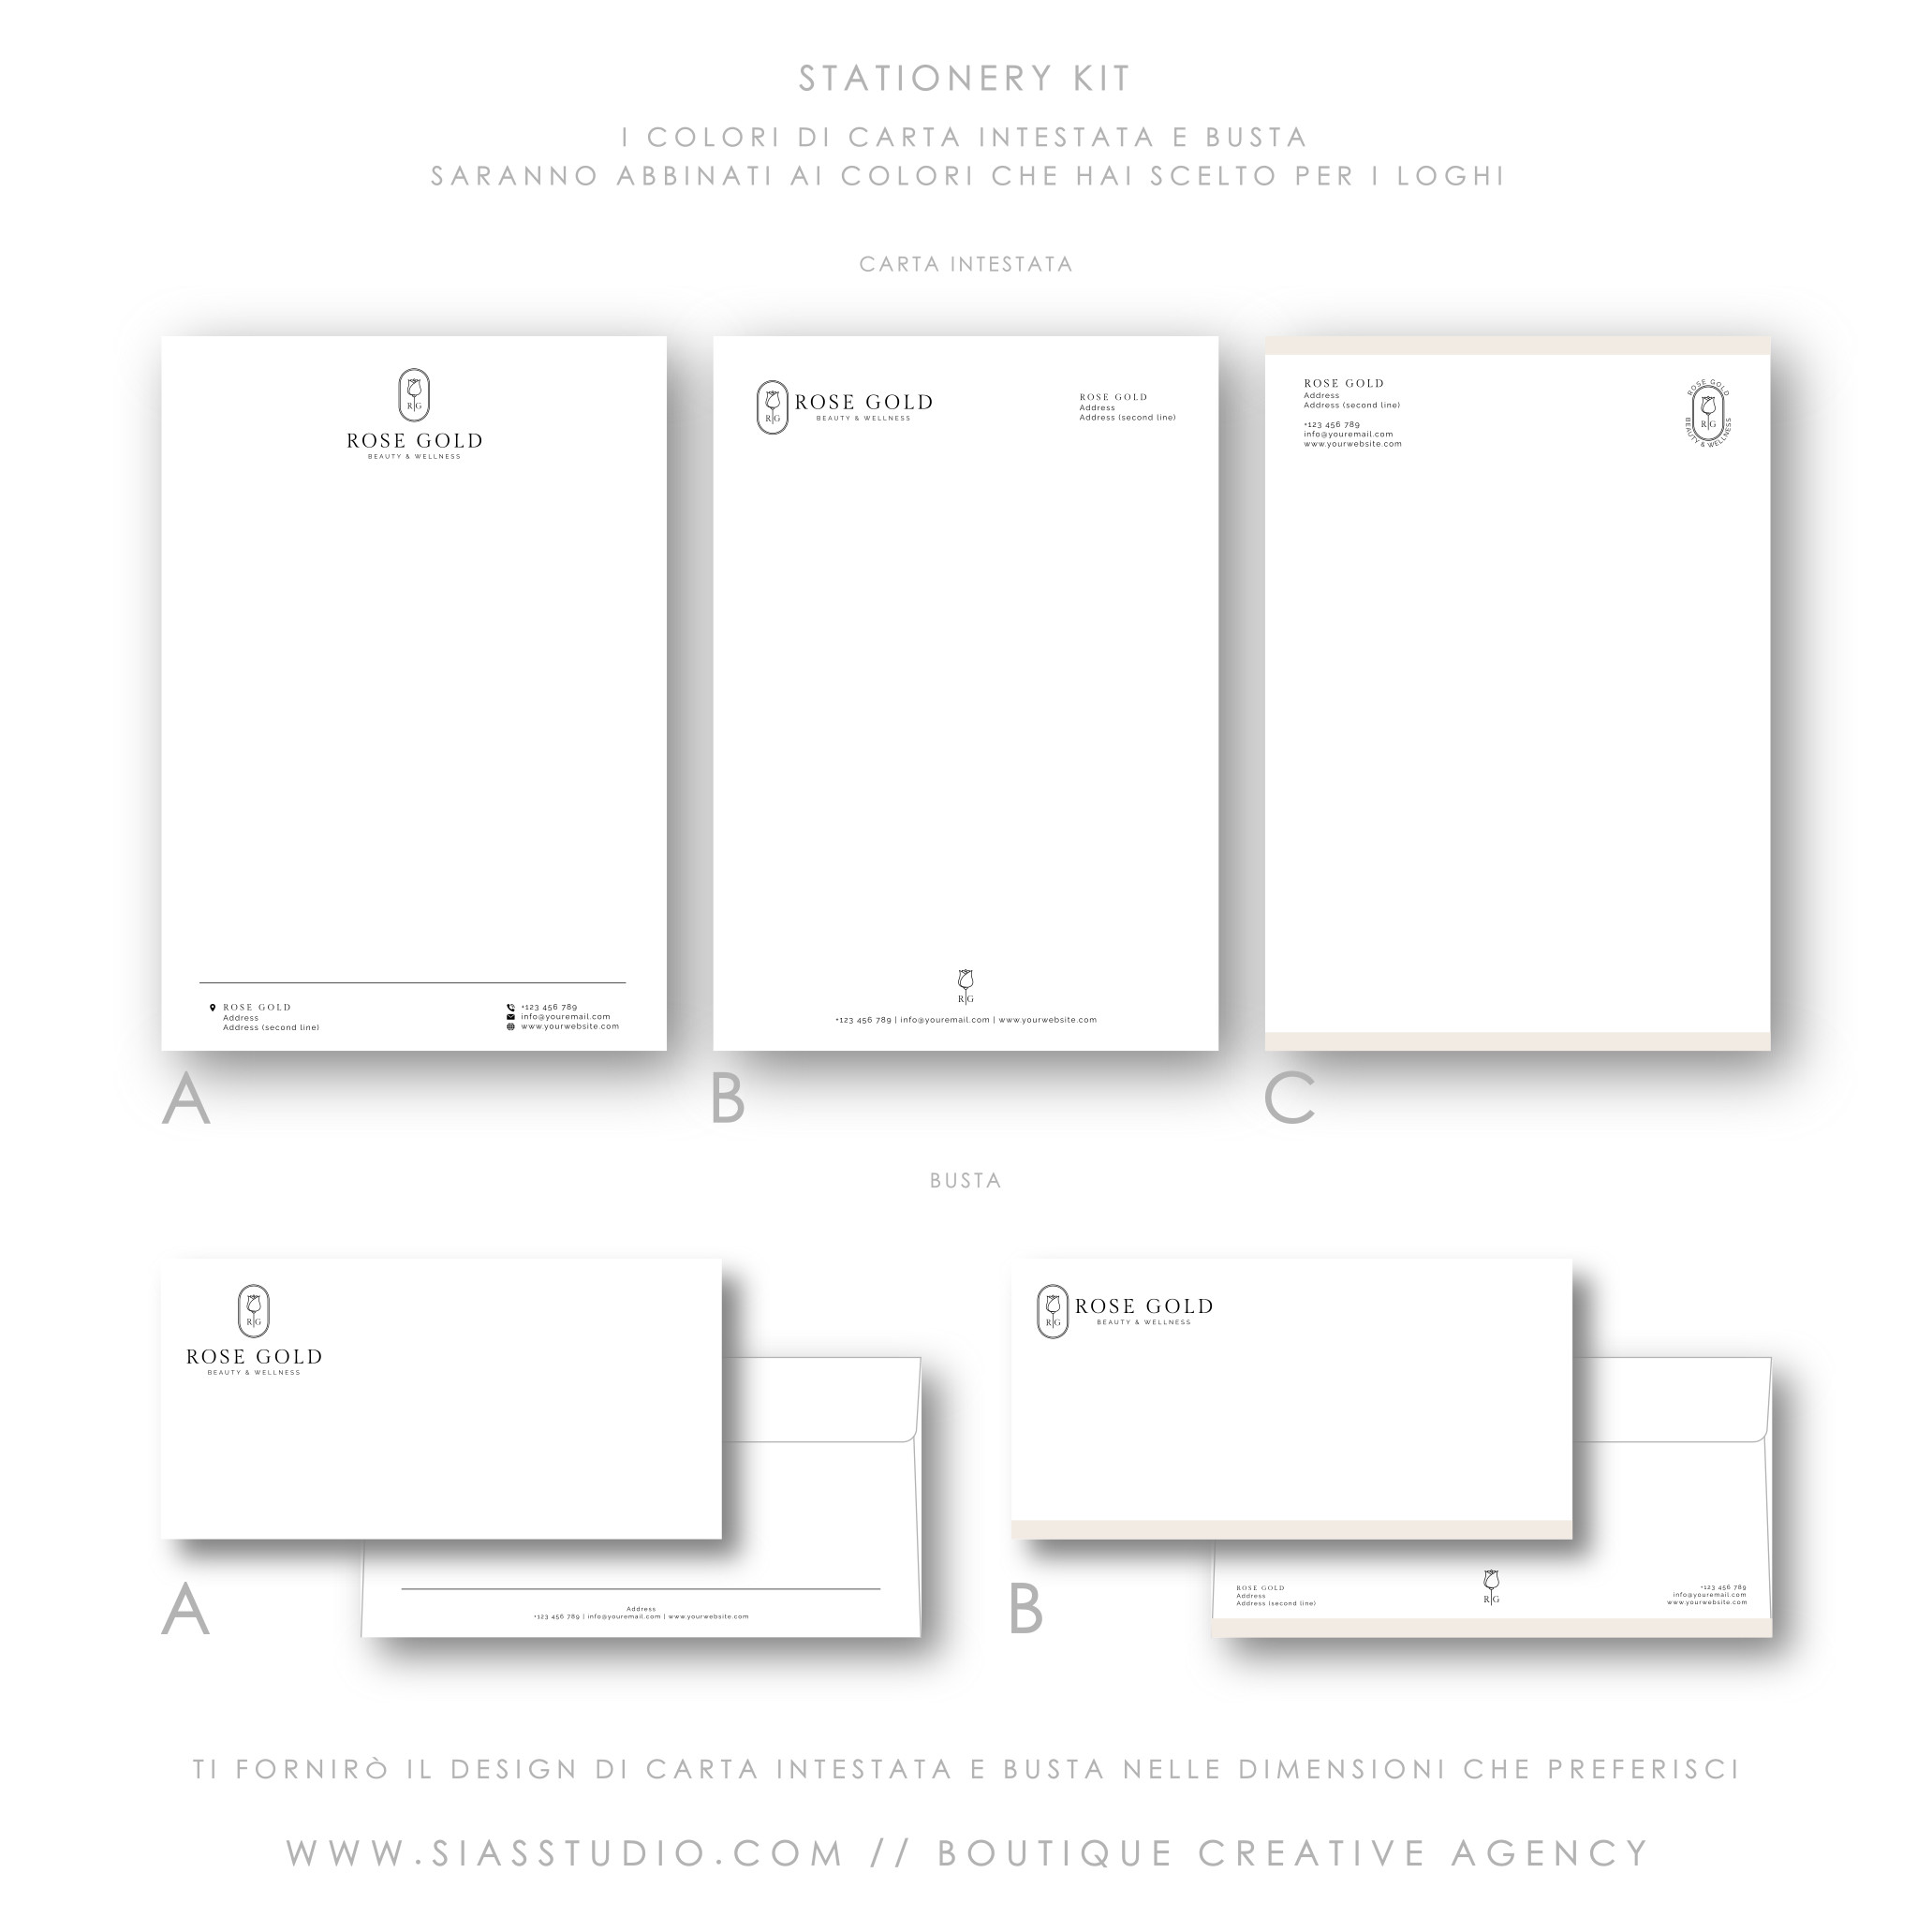 Rose Gold - Pacchetto di branding Stationery kit